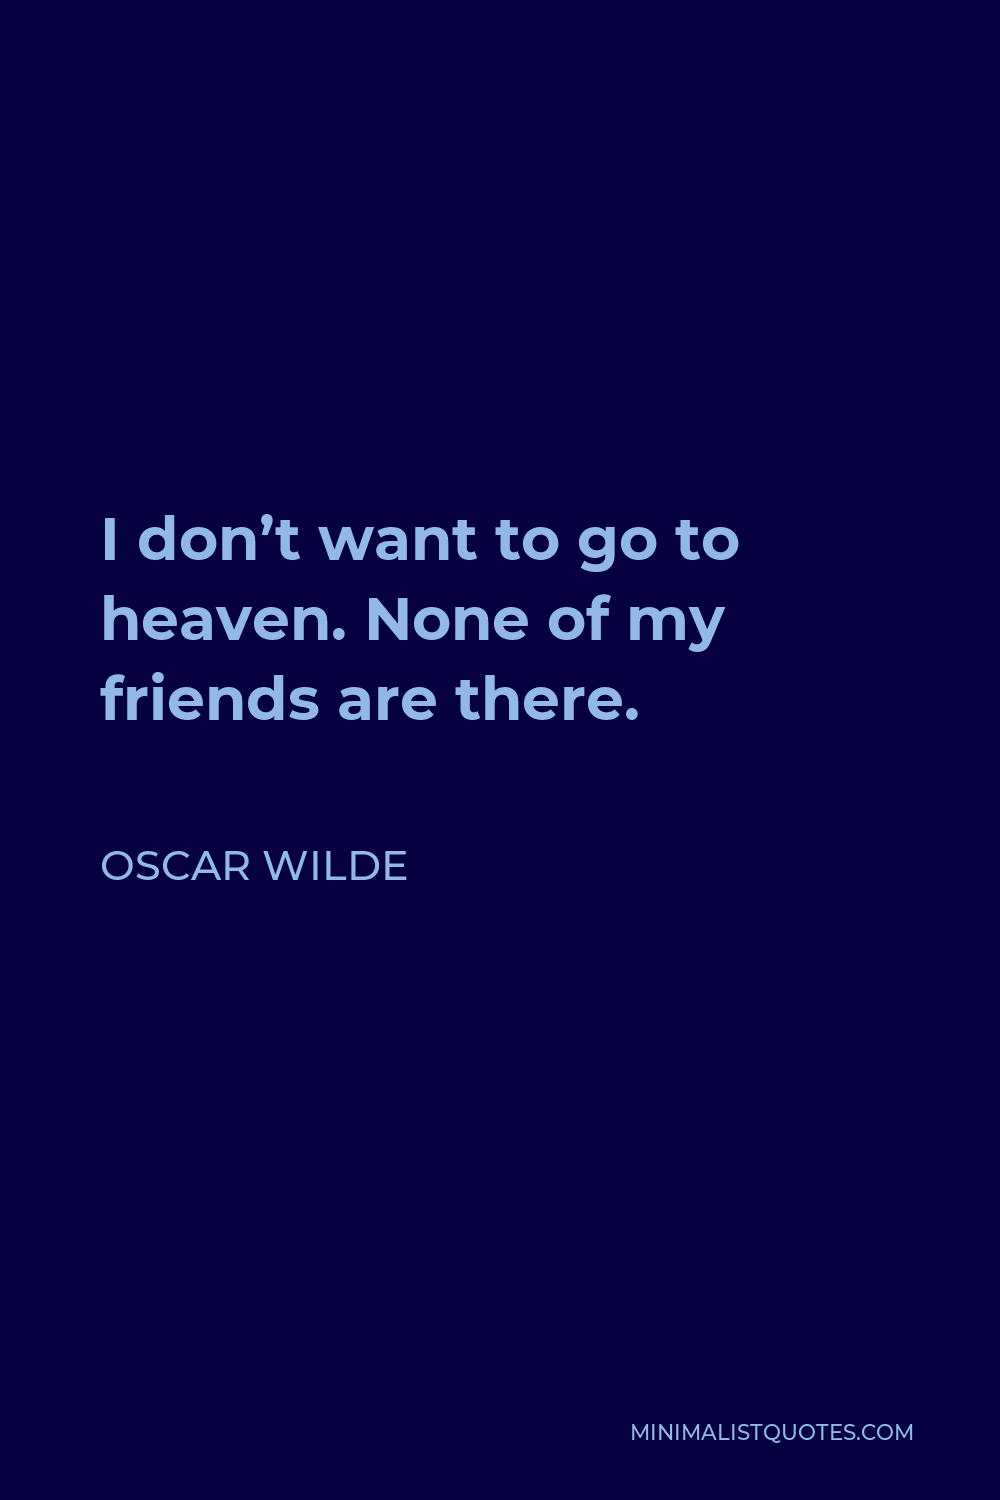 Oscar Wilde Quote - I don’t want to go to heaven. None of my friends are there.